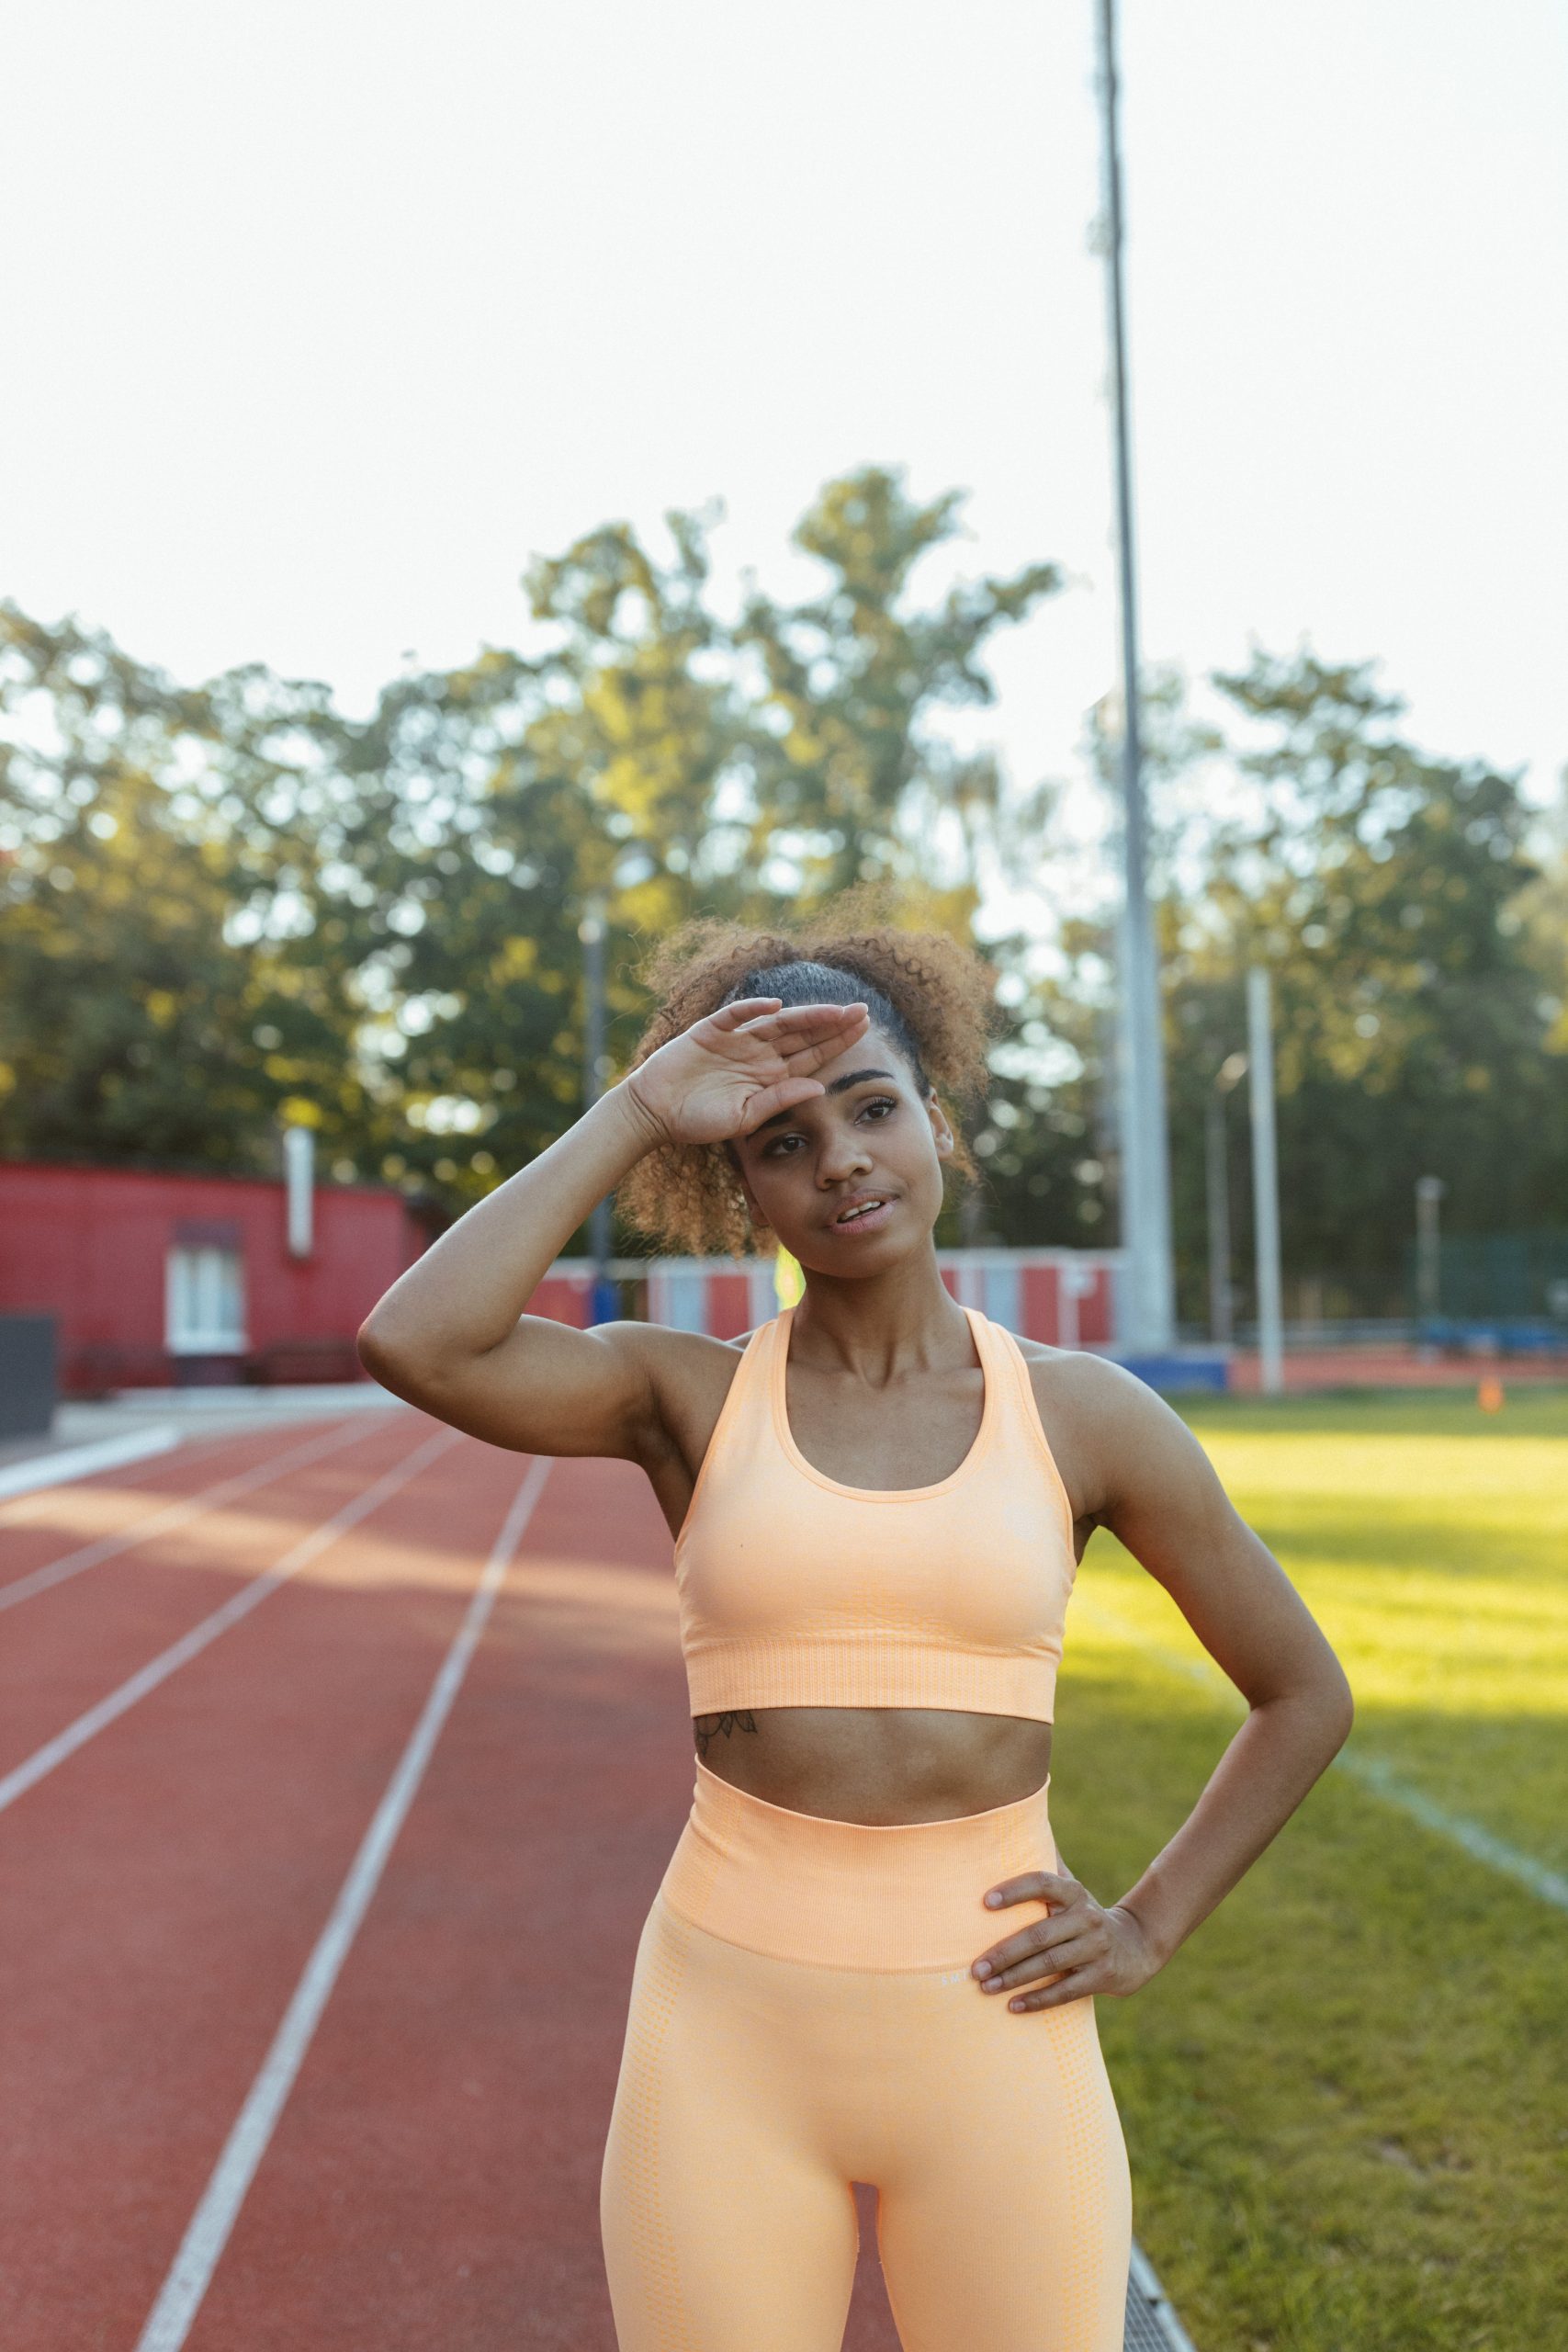 An athletic woman pausing with her hand on her forehead at a track field.